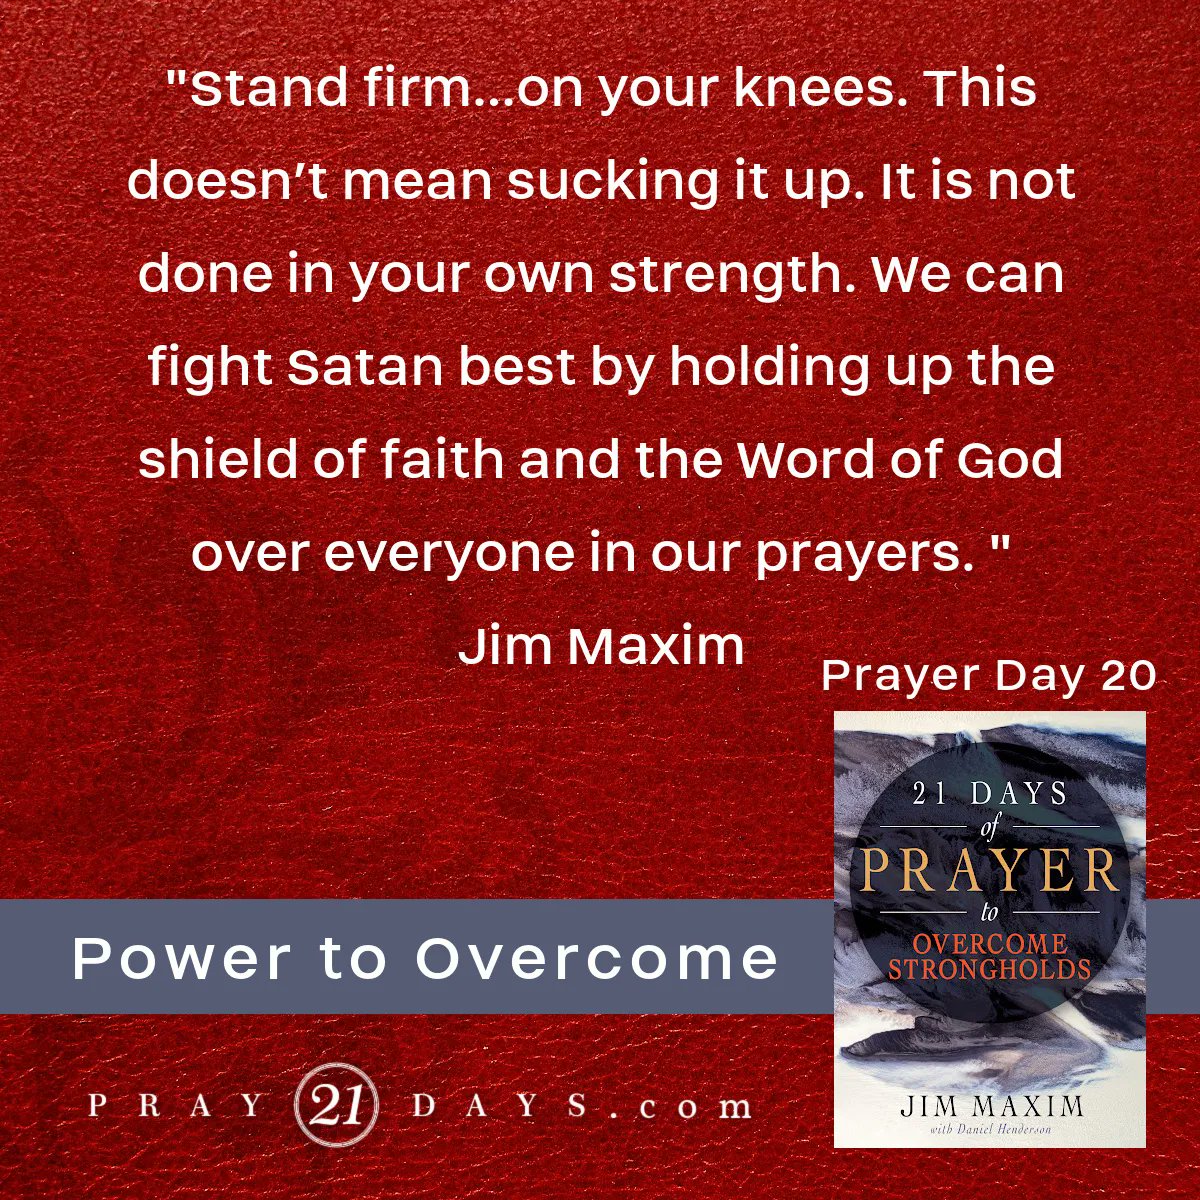 Day 20
'Stand firm…on your knees. This doesn’t mean sucking it up. It is not done in your own strength. We can fight Satan best by holding up the shield of faith and the Word of God over everyone in our prayers.' Jim Maxim
#StandFirm #Pray21Days #ShieldofFaith